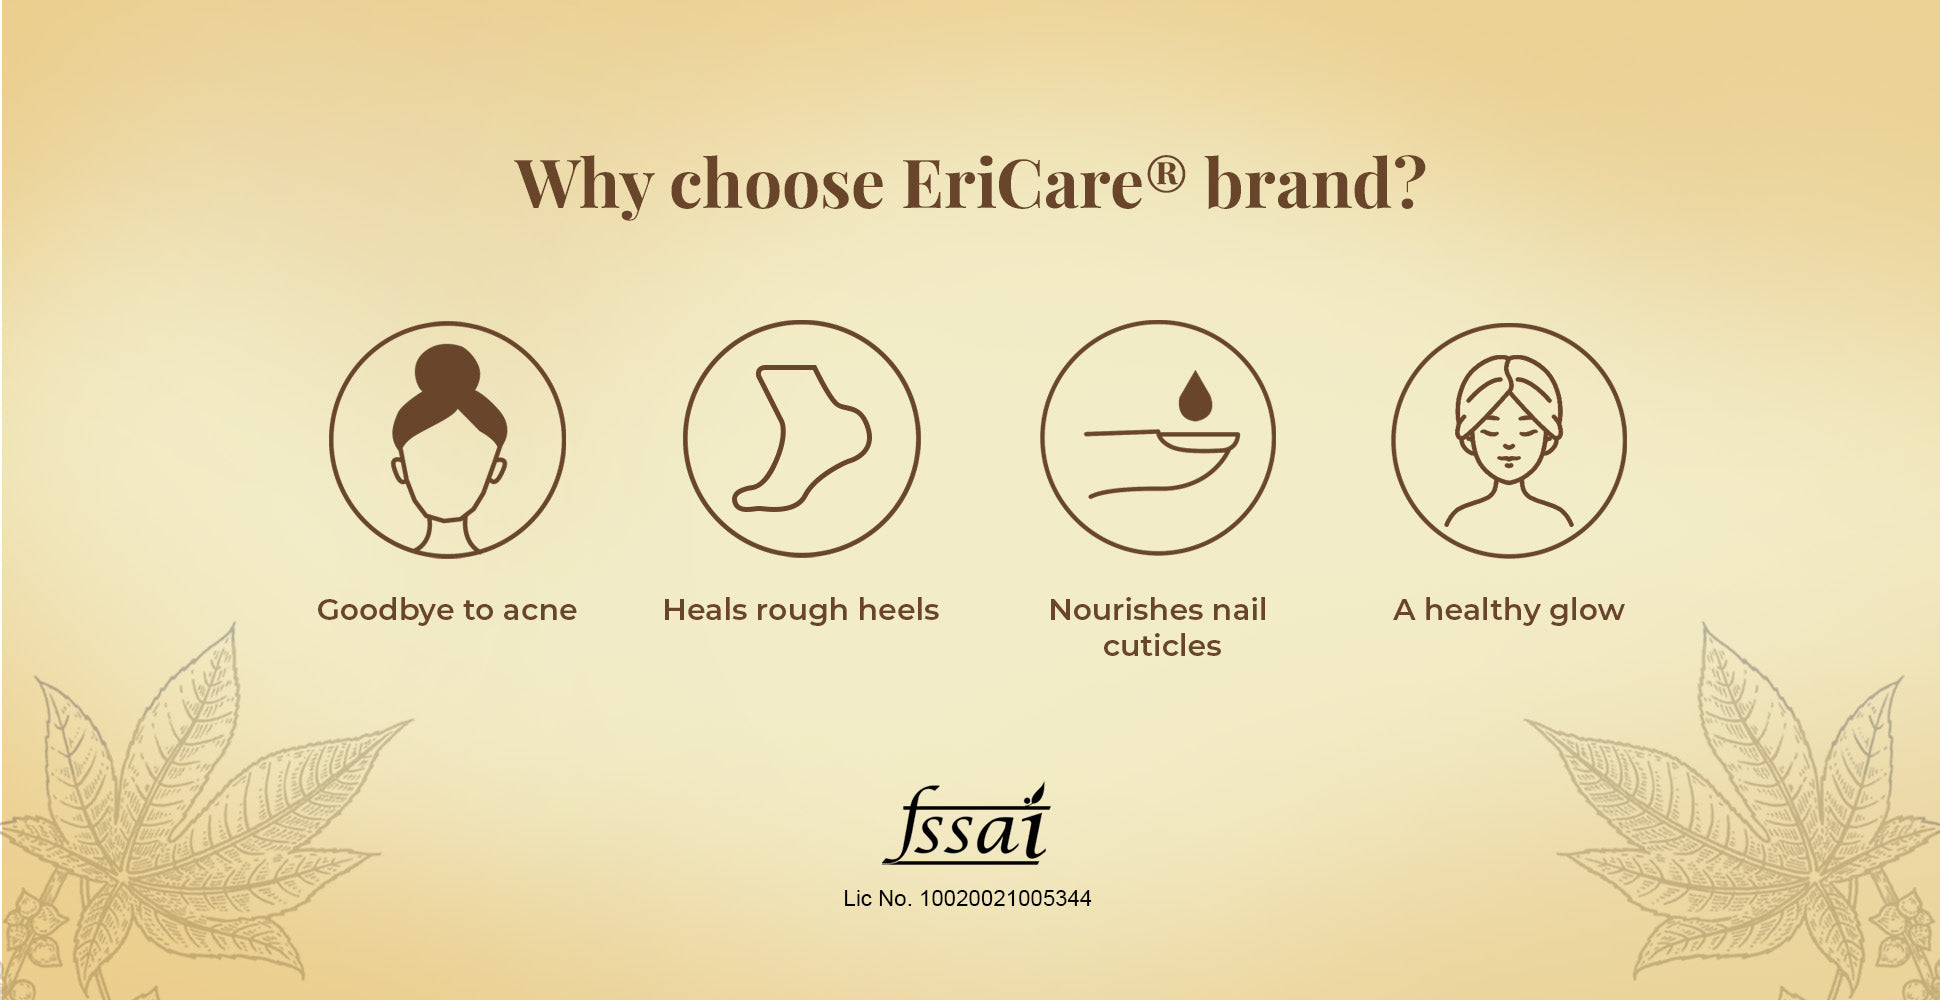 Image displaying on why one should choose Ericare cold-pressed castor oil for acne free skin, nourished nail cuticles, smooth krackless heels, healthy glow with clear skin